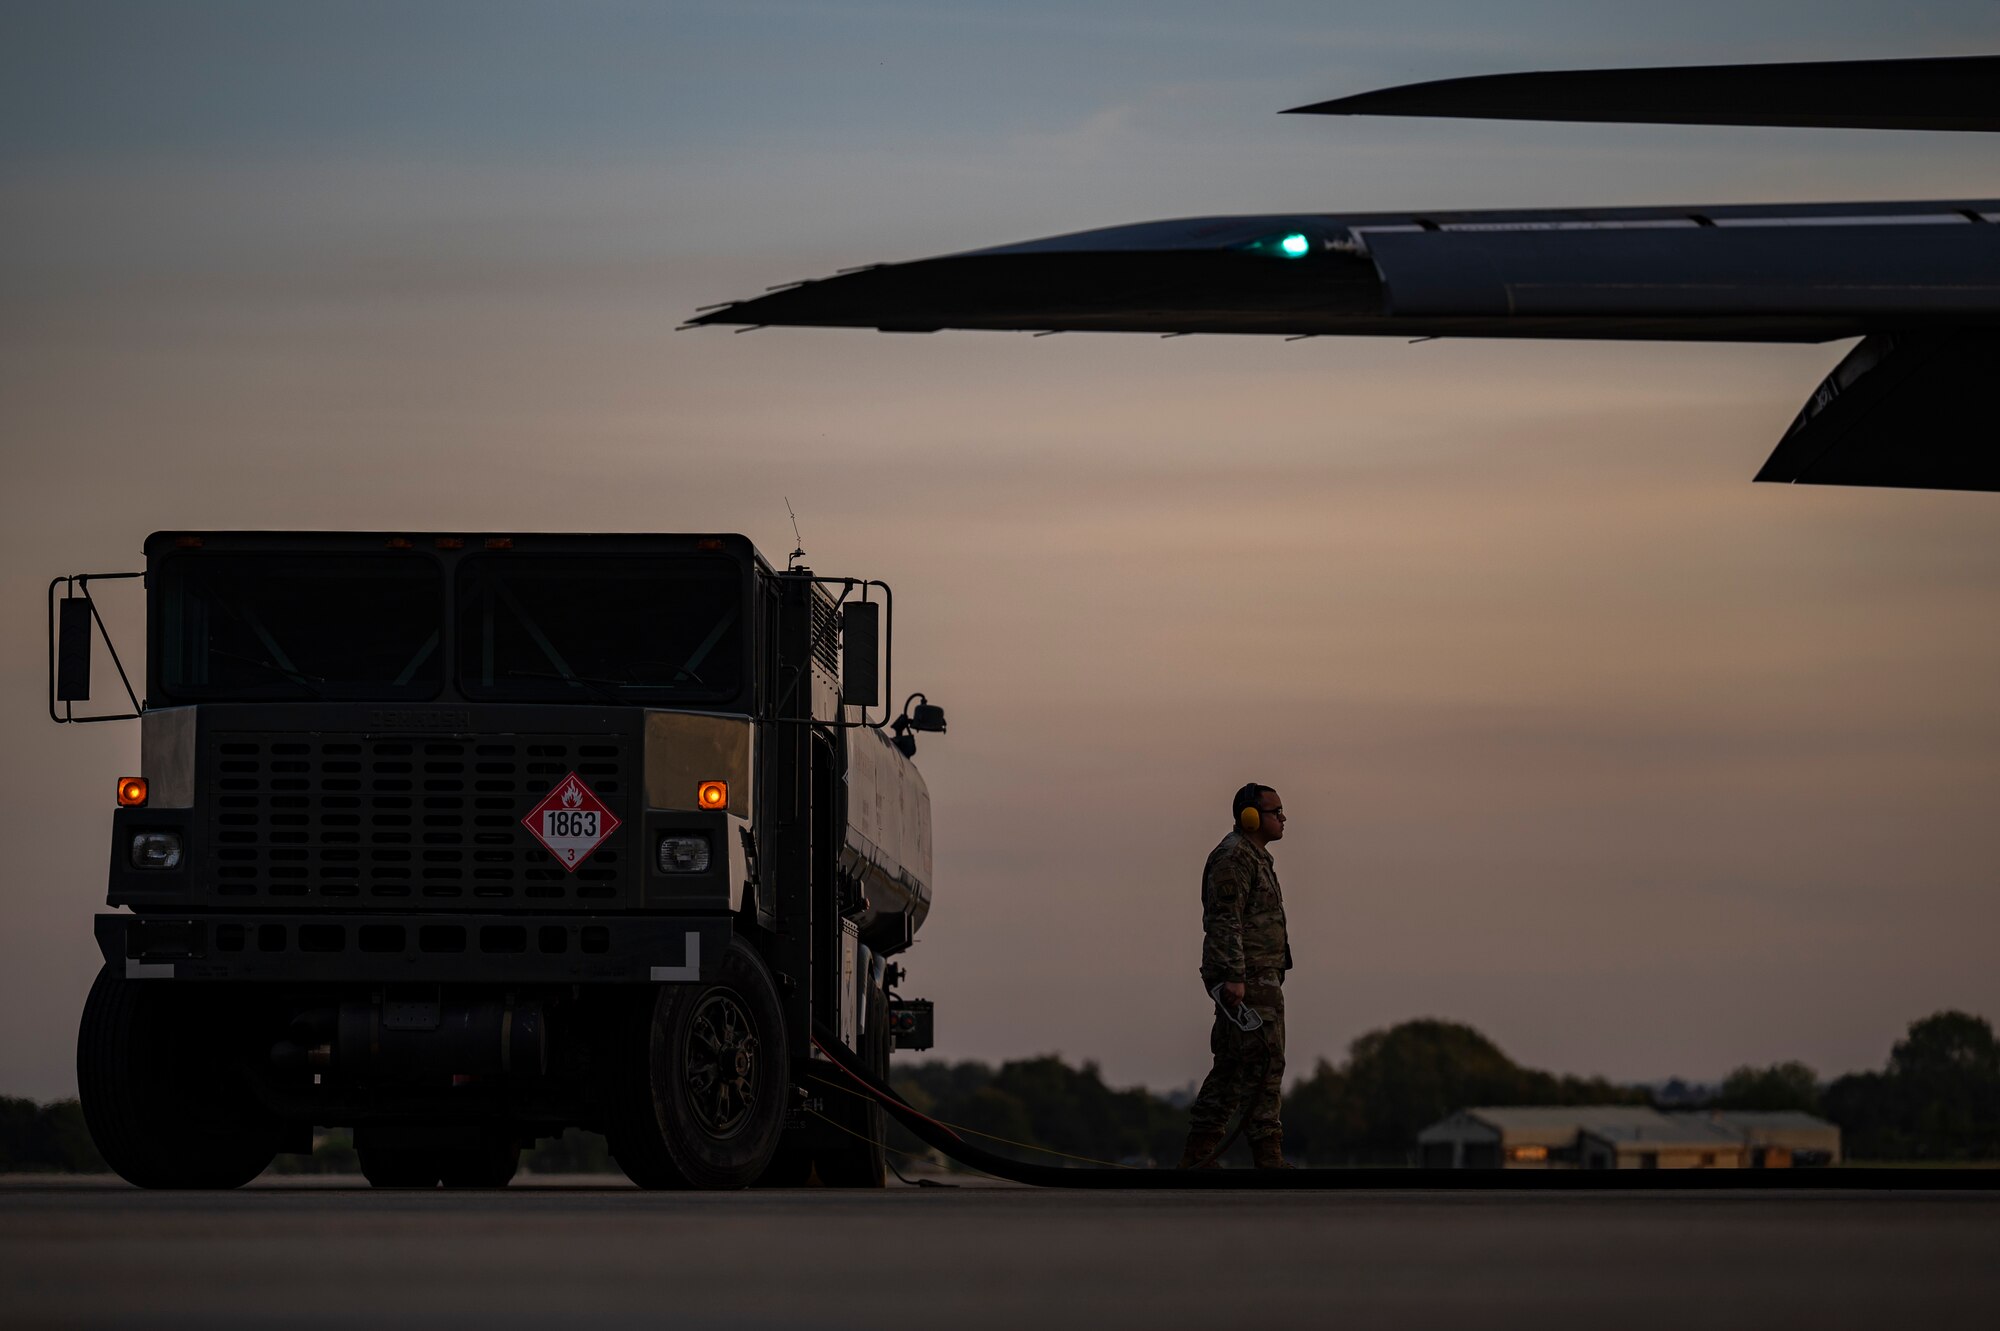 A fuels specialist assigned to the 9th Expeditionary Bomb Squadron, stands by while a B-1B Lancer is being refueled at RAF Fairford, United Kingdom, Oct 11, 2021. Hot pit refueling is the refueling of an aircraft without turning off the engines. These refueling operations give aircrew the ability to conduct multiple mission sets before needing to turn the aircraft over to undergo routine maintenance. (U.S. Air Force photo by Senior Airman Colin Hollowell)